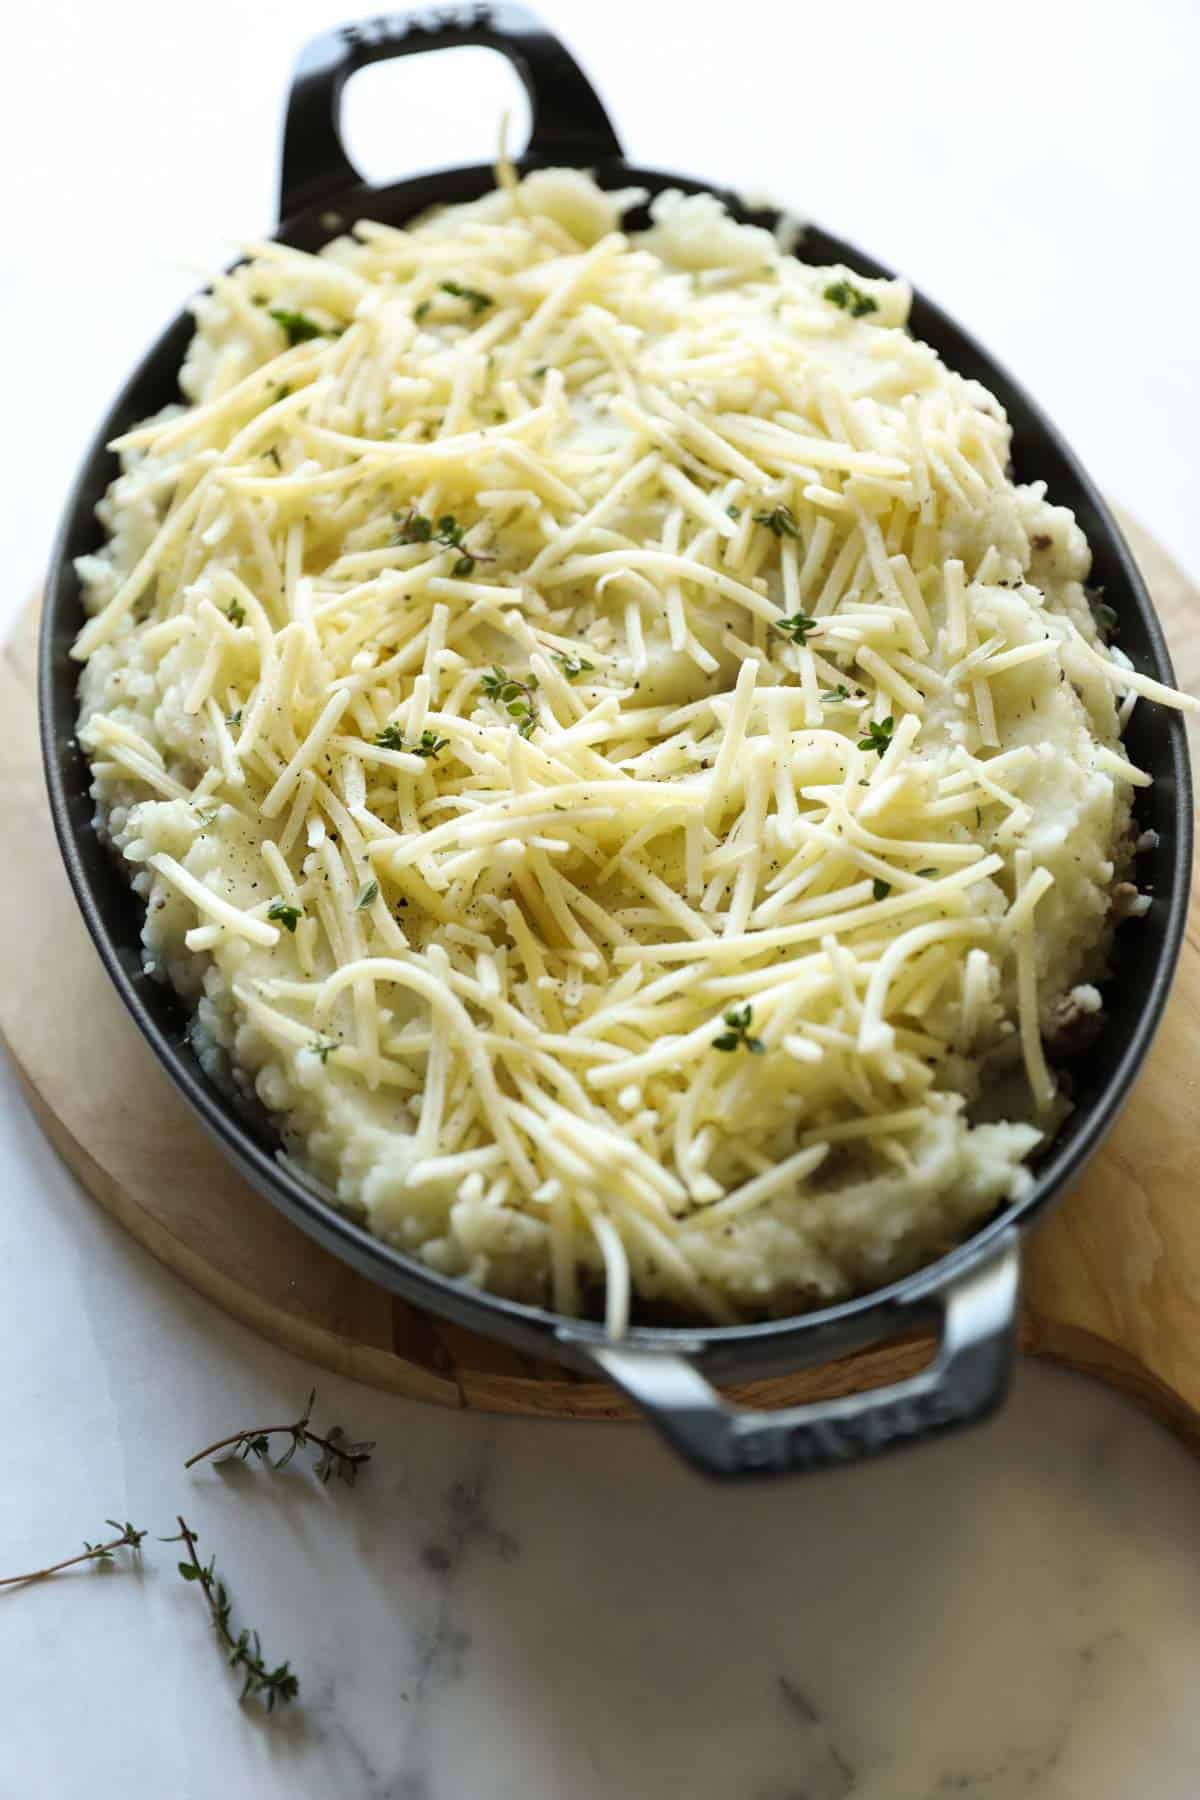 a casserole dish with mashed potatoes and shredded cheese on top